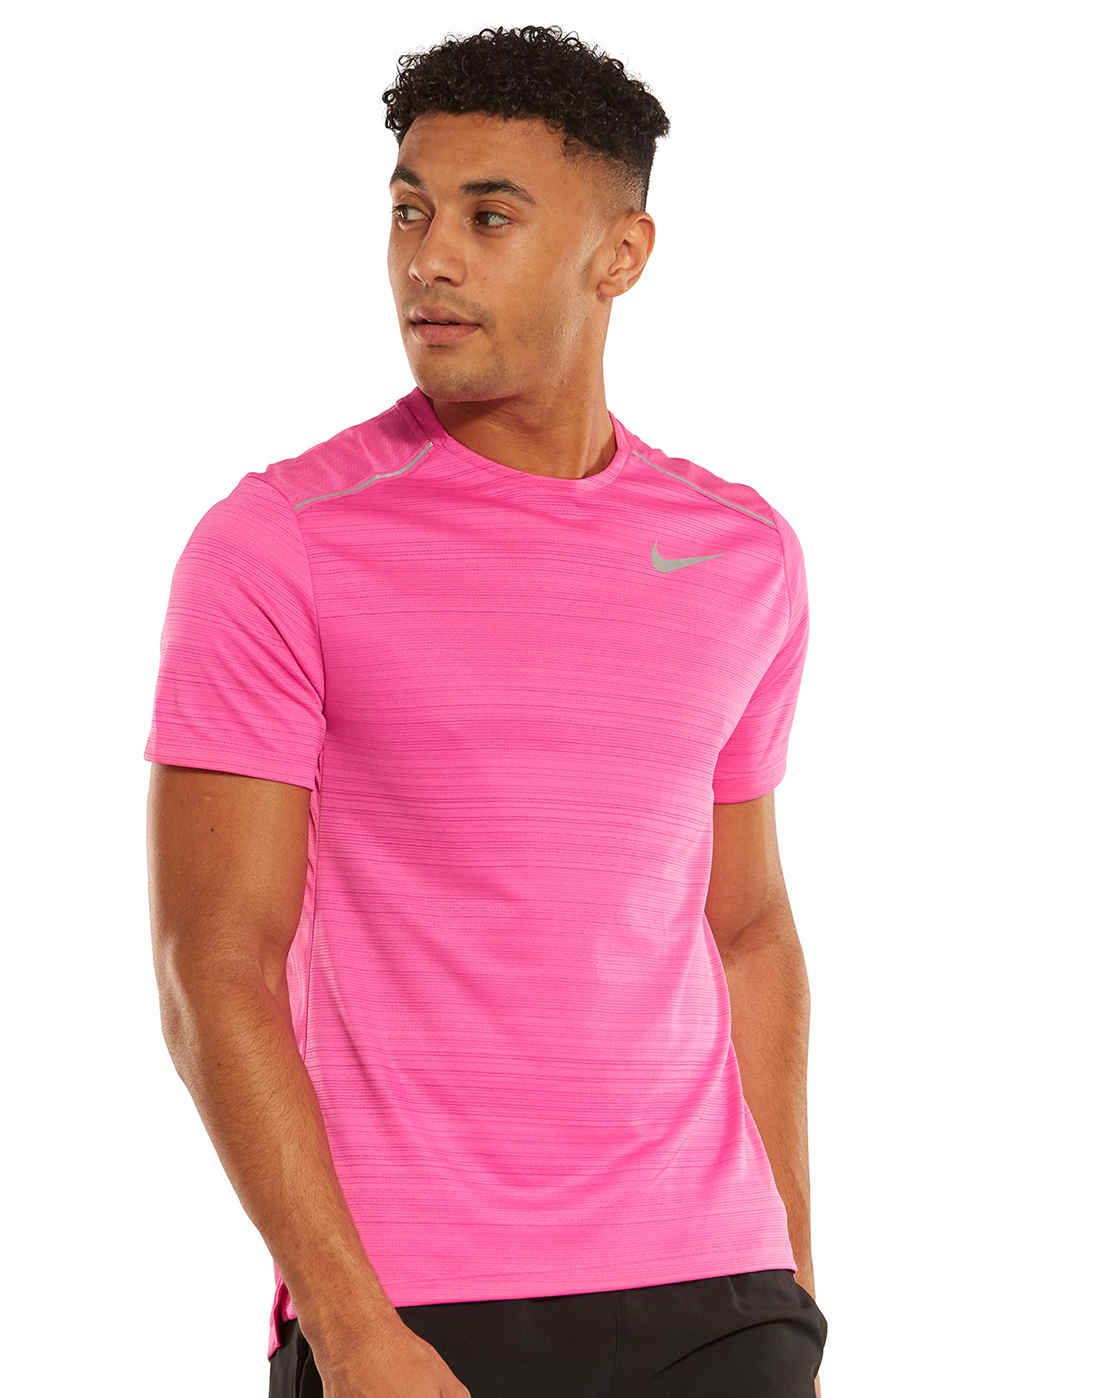 Buy > nike miler t shirt and shorts > in stock